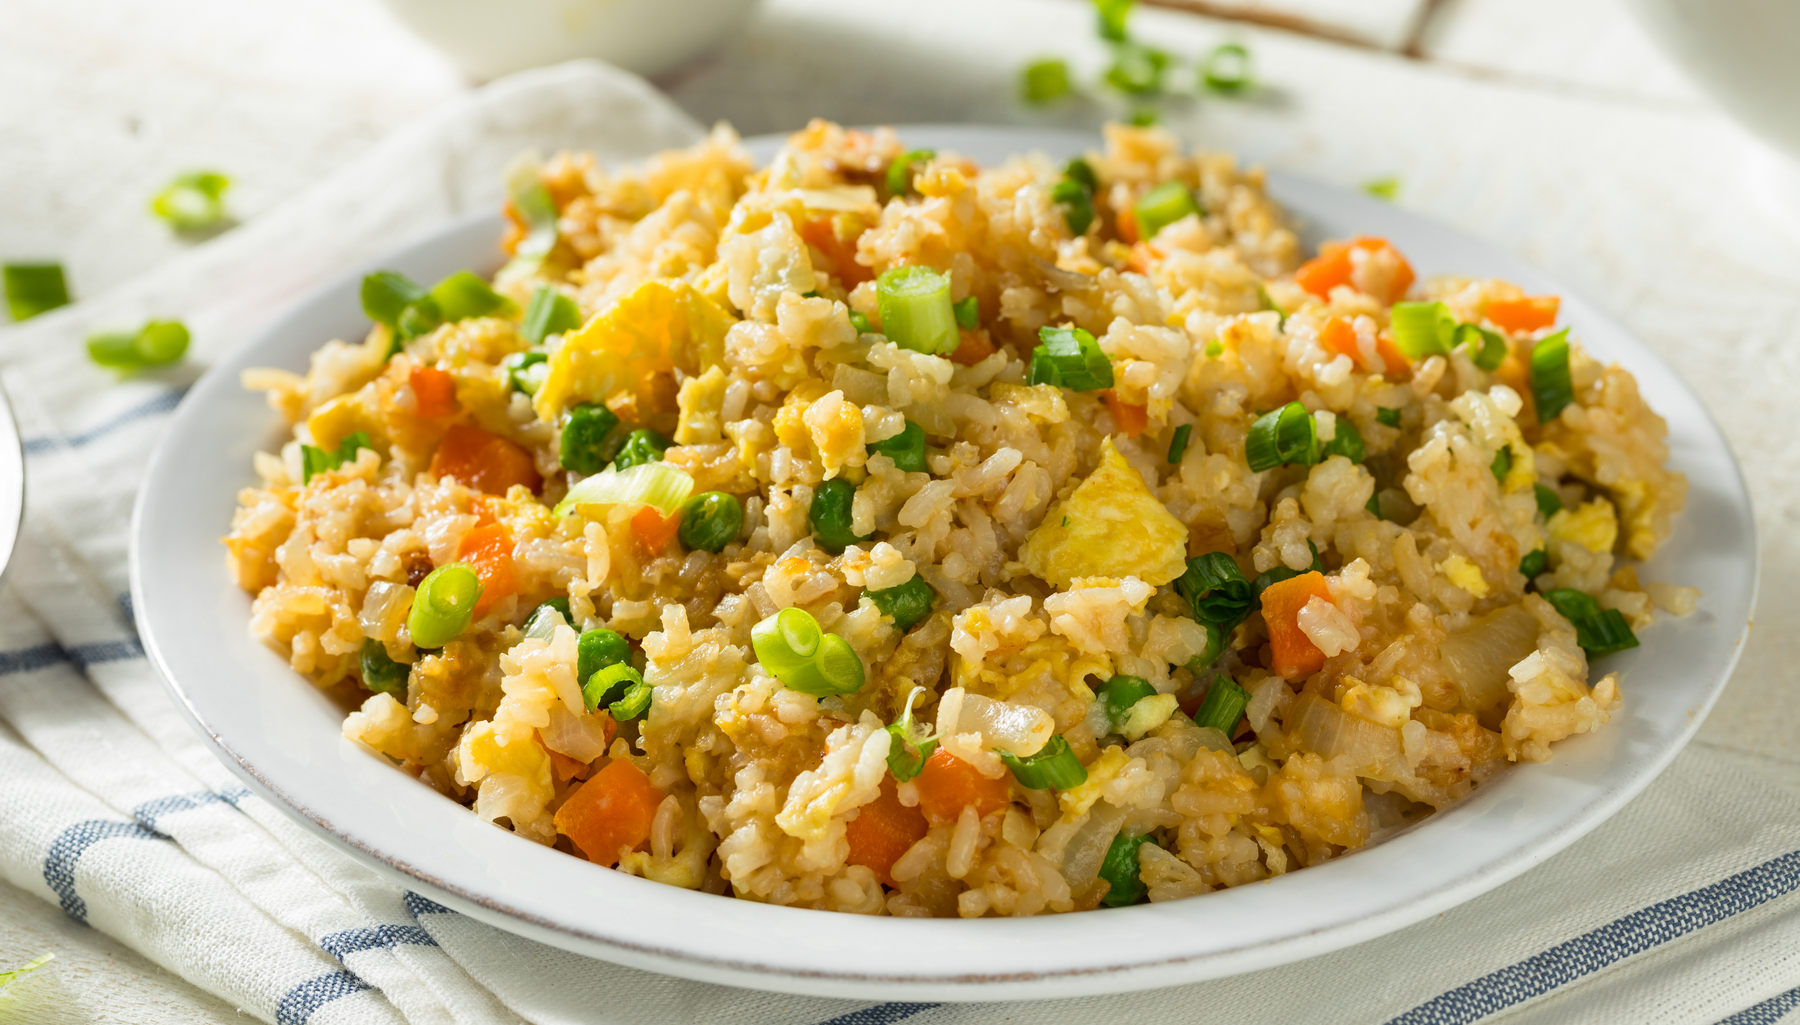 Fried brown rice